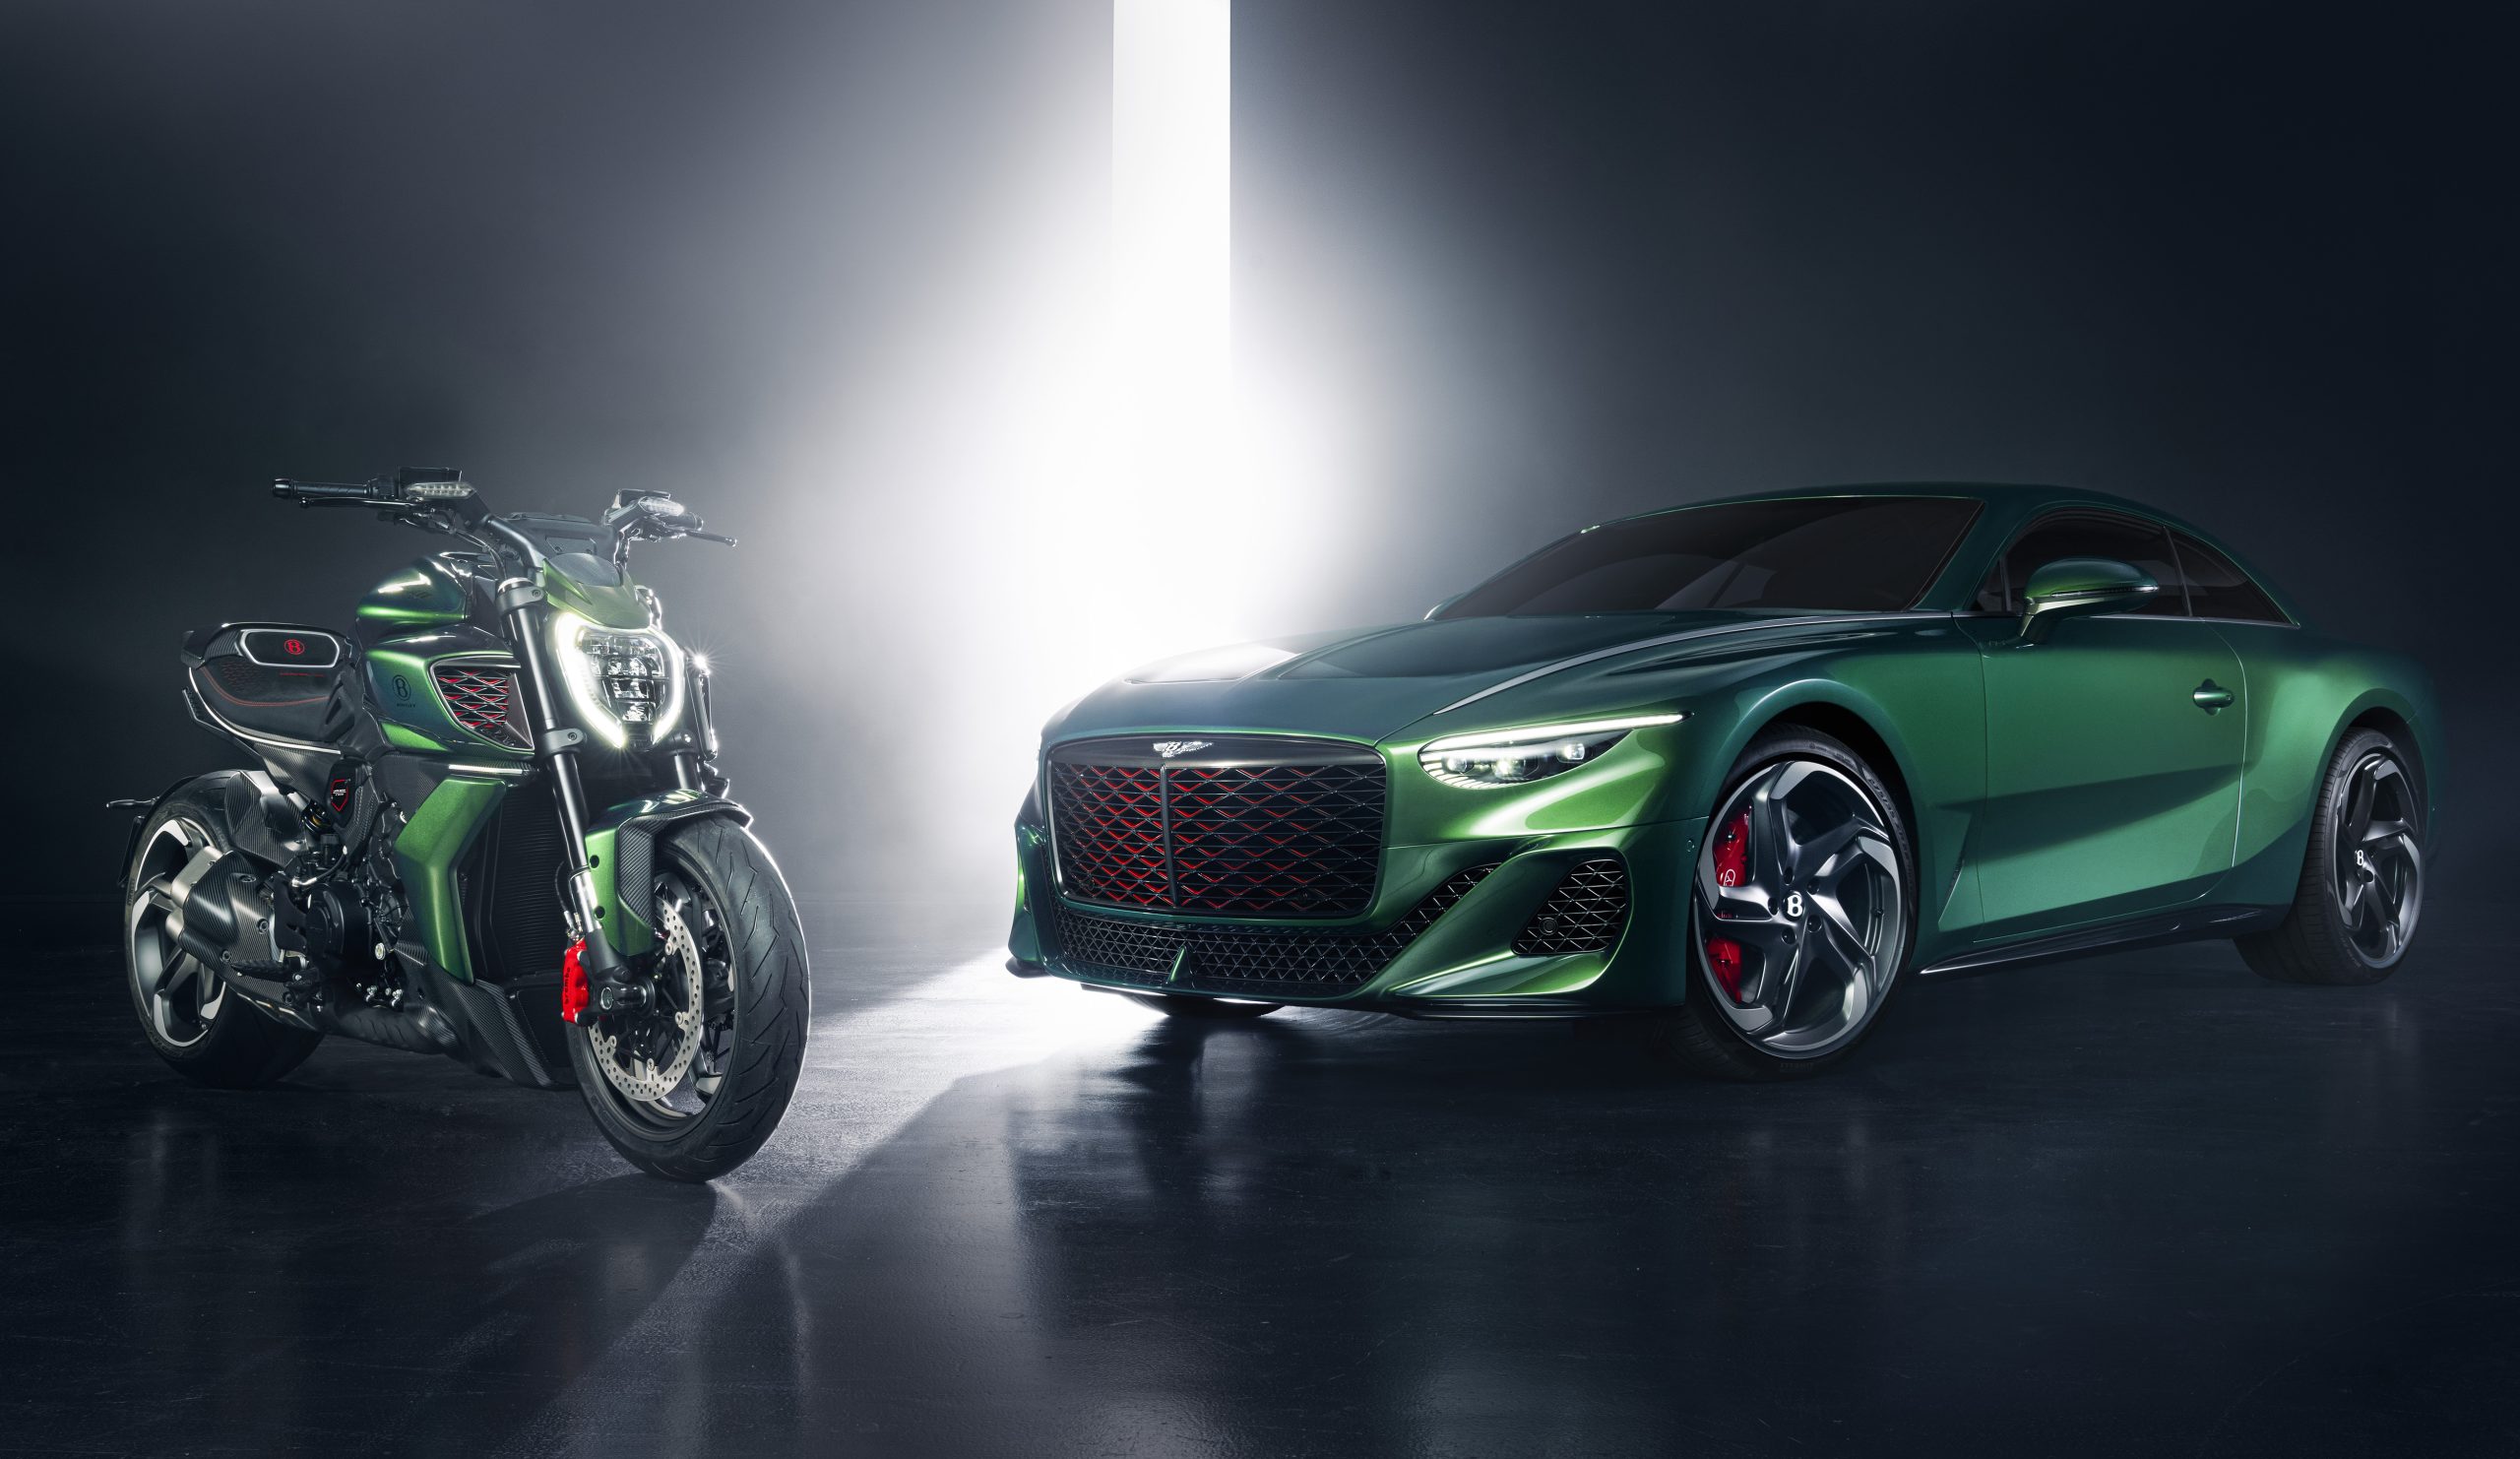 Bentley takes to two wheels with Ducati